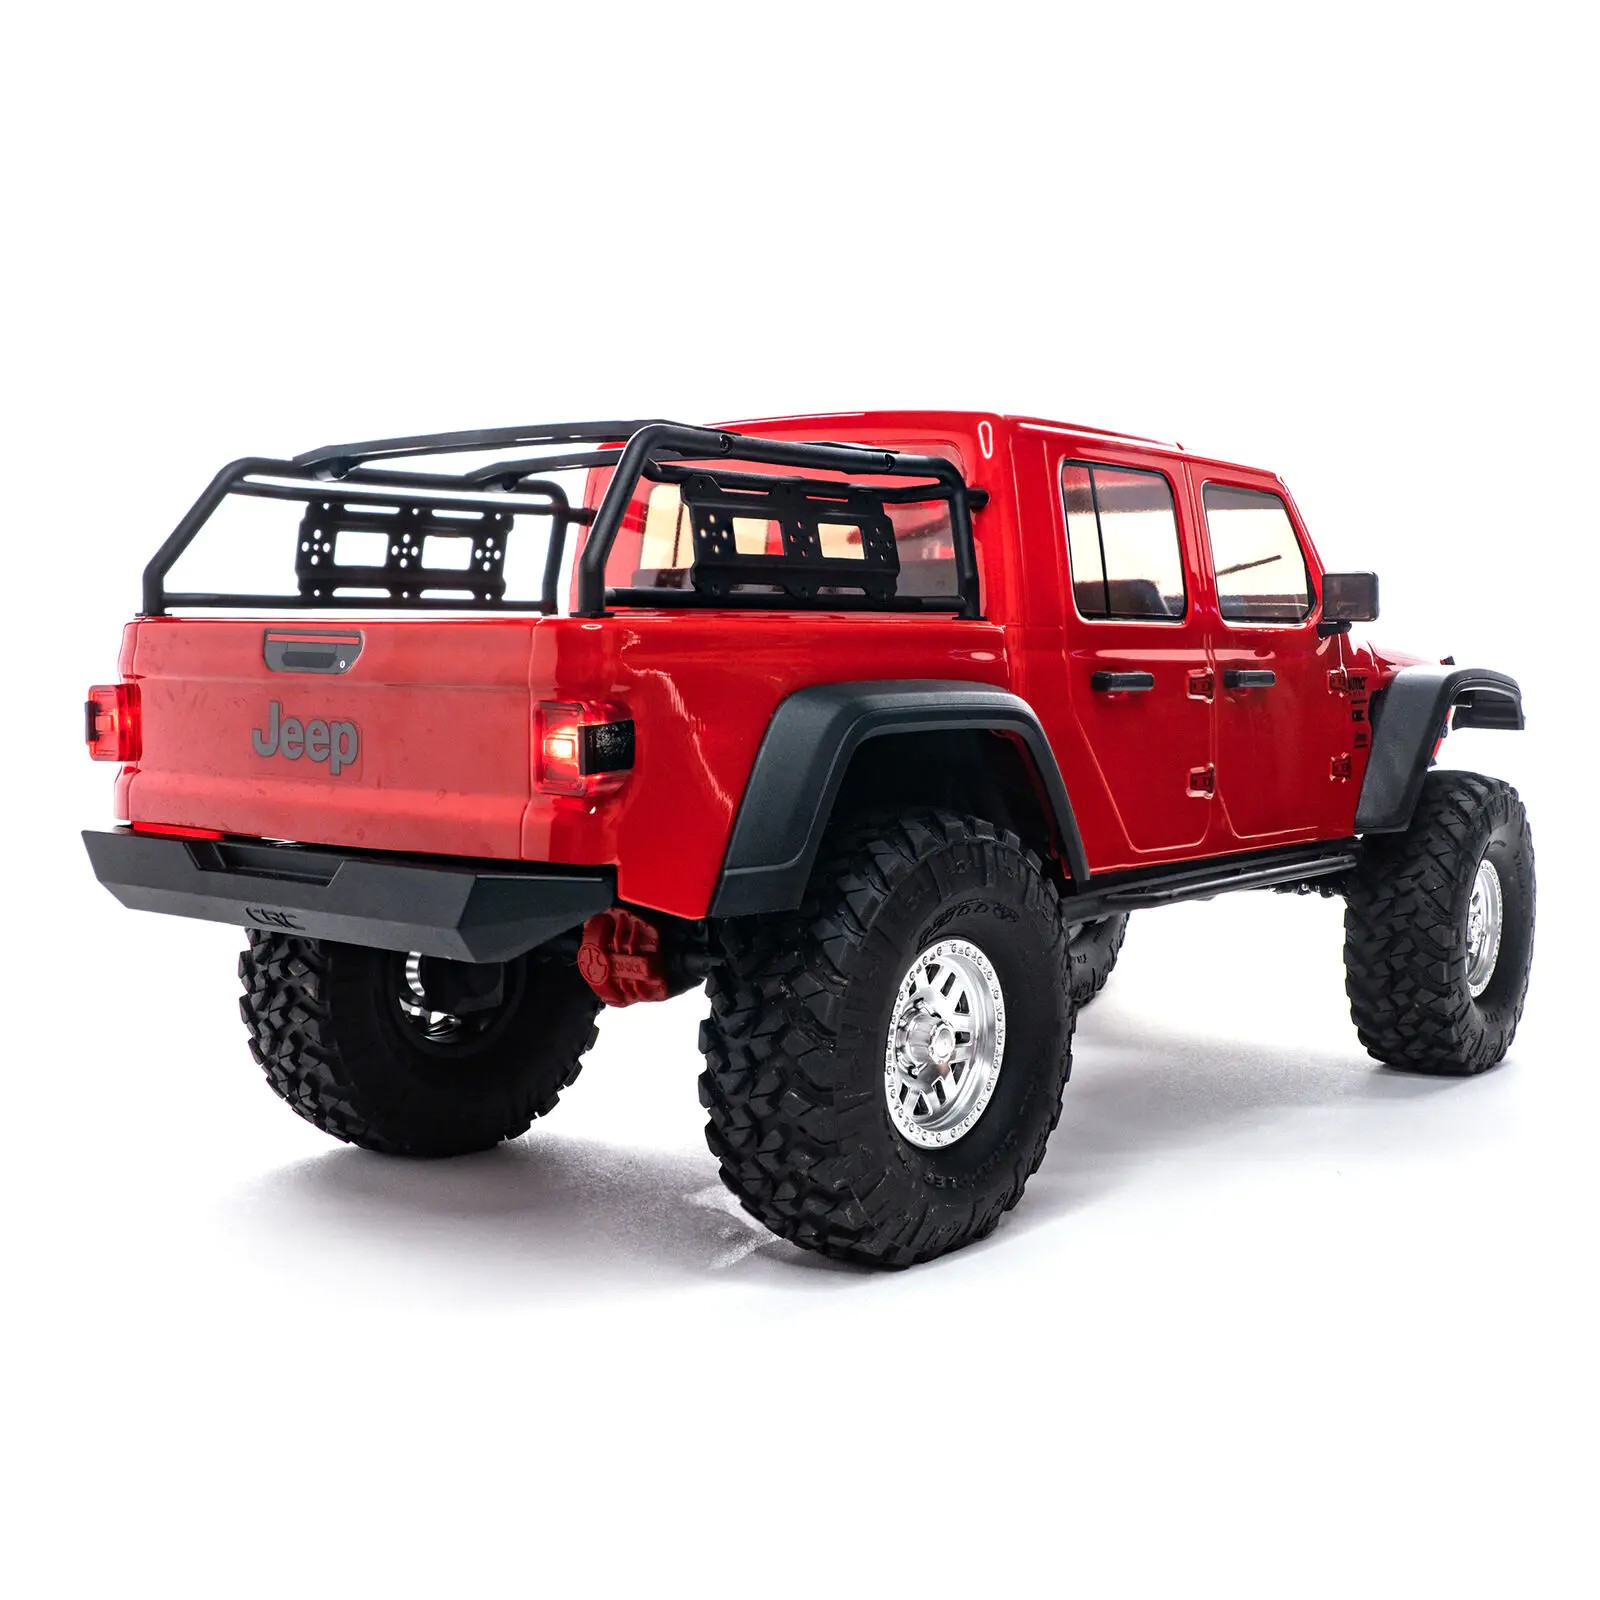 Axial Scx10 iii 1/10 Jeep JT Gladiator with Portals RTR